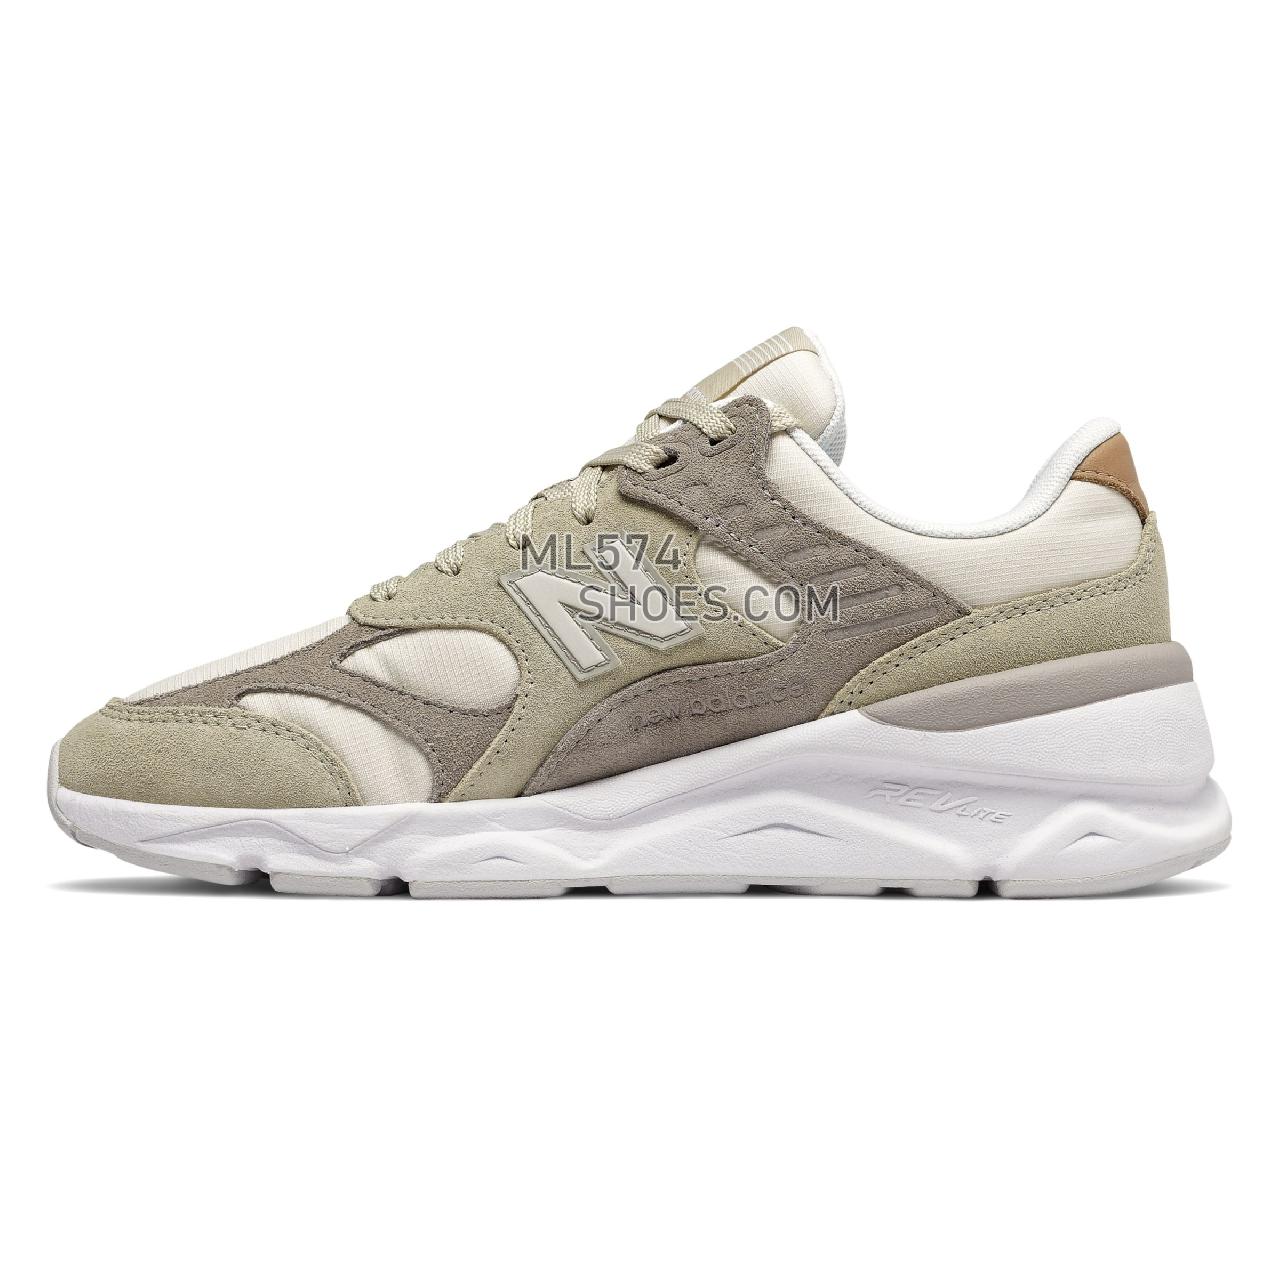 New Balance X-90 Reconstructed - Women's X-90 Classic WSX90TV1-28321-W - Stonewear with Oyster - WSX90TRA